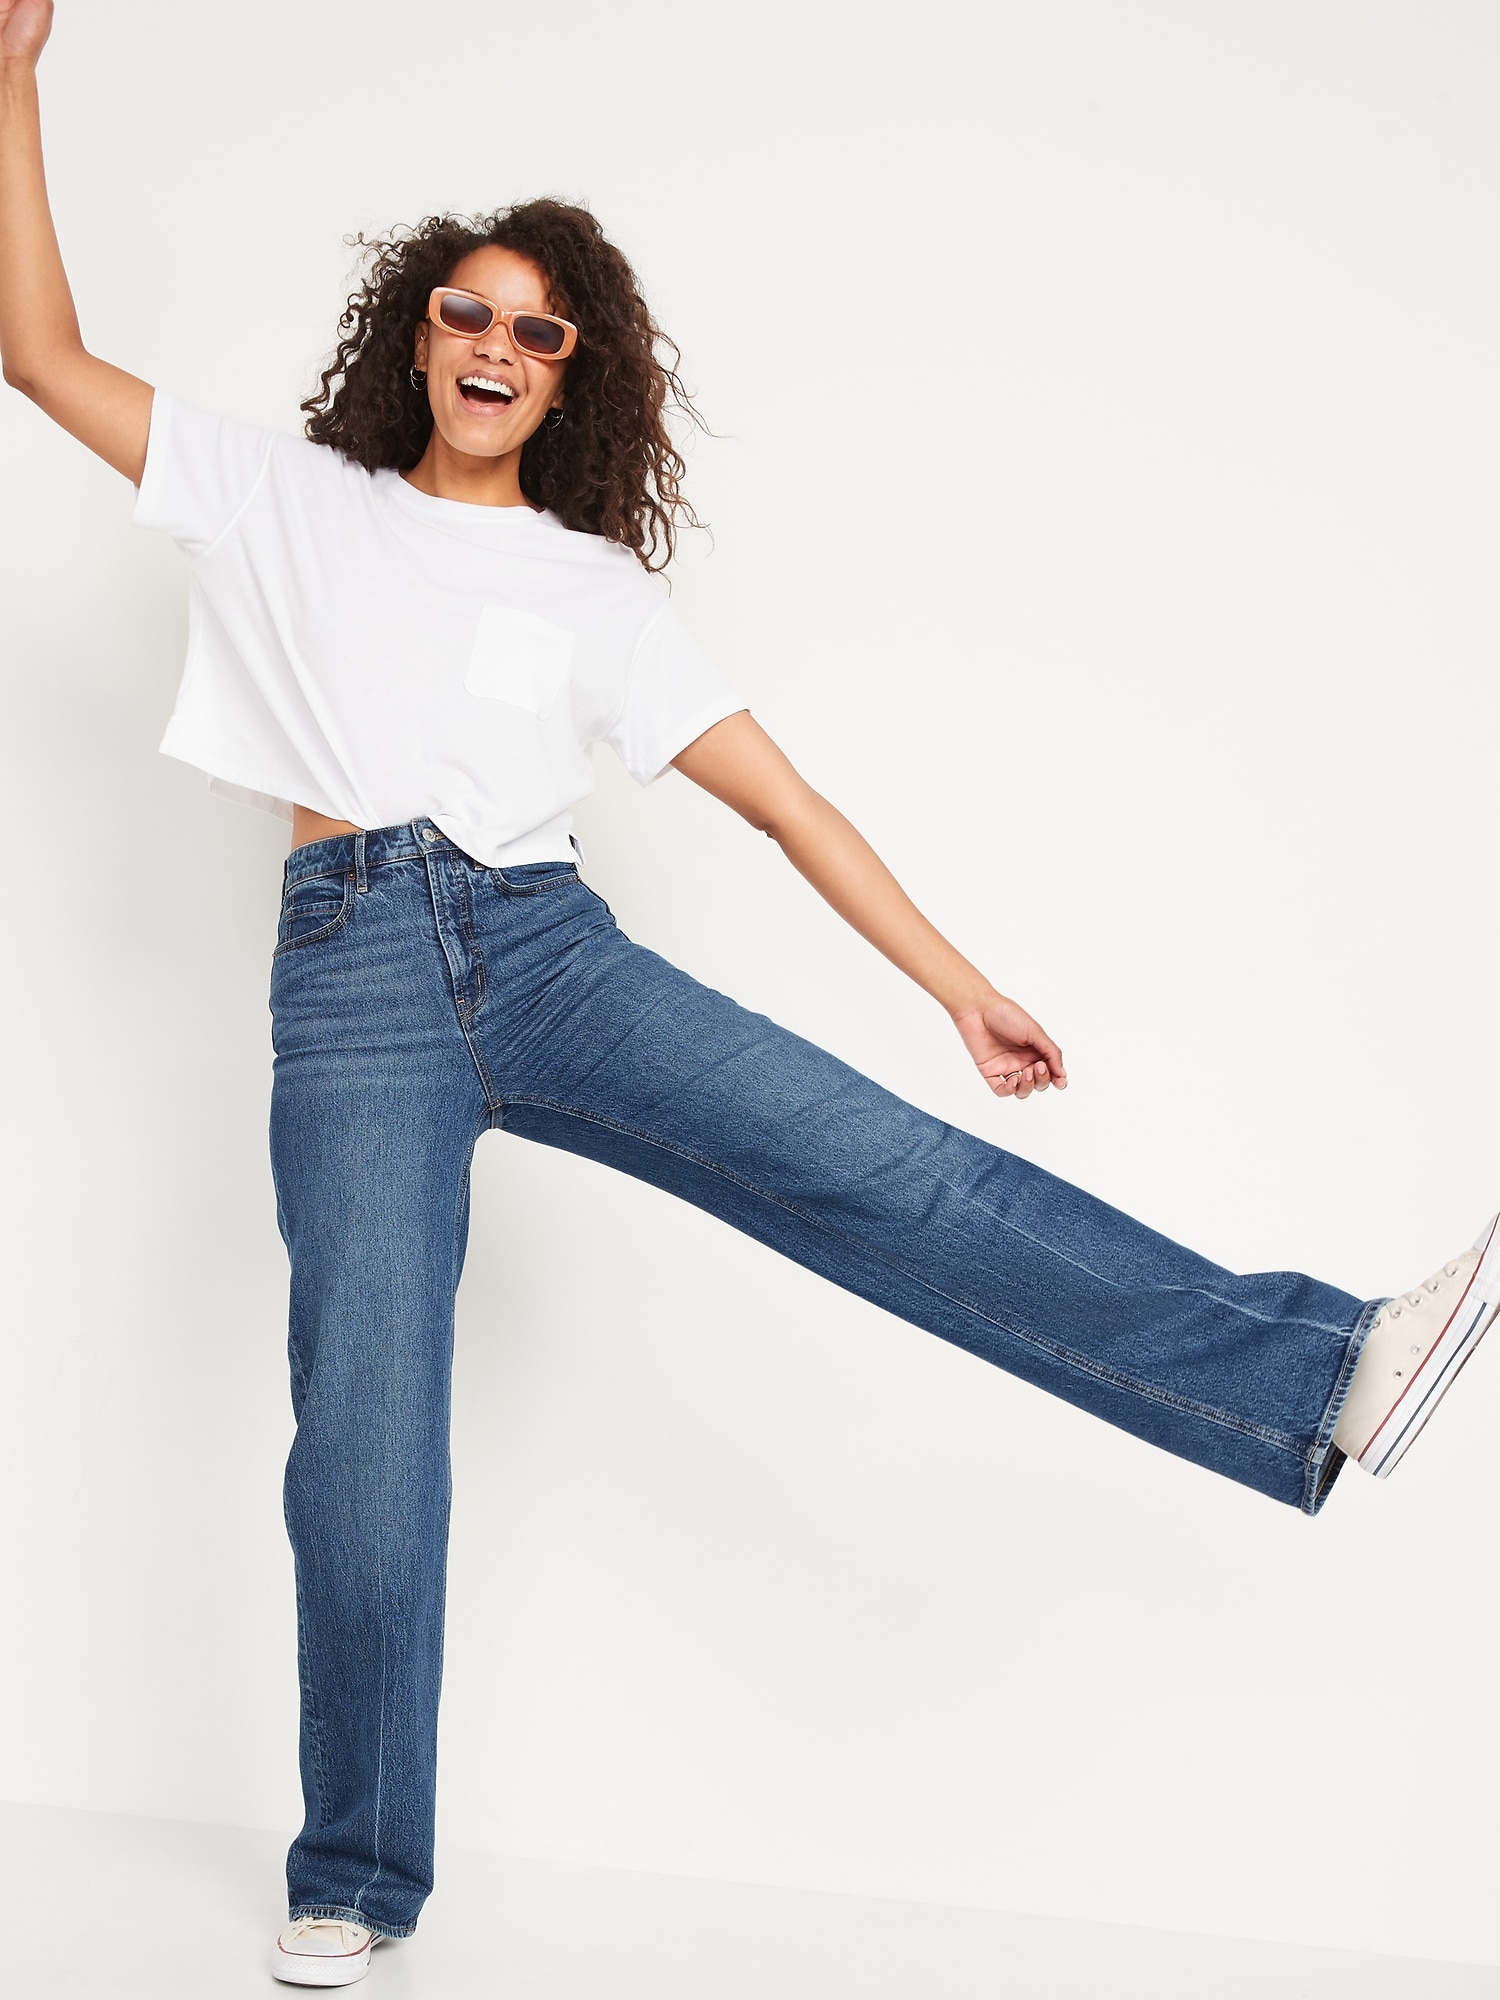 Extra High-Waisted Sky-Hi Wide-Leg Jeans for Women